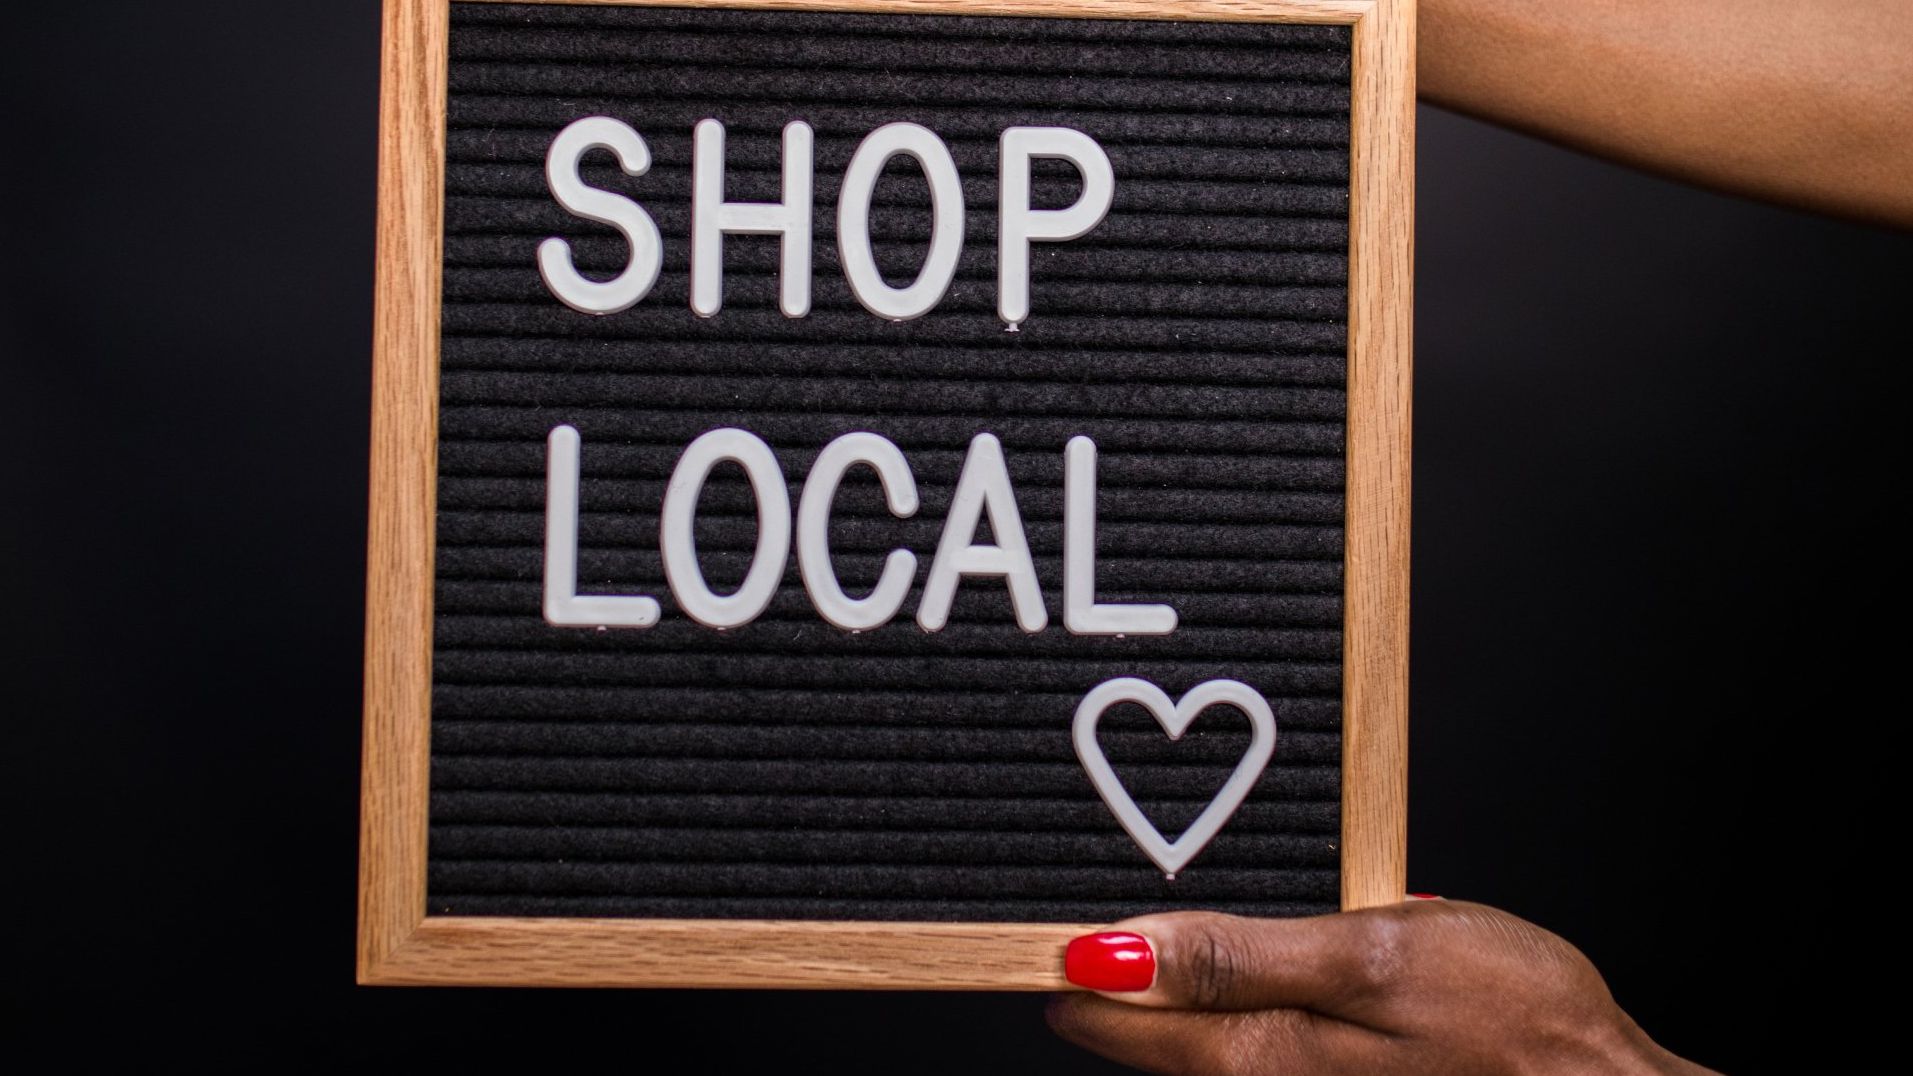 A woman is holding a sign that says `` shop local ''.